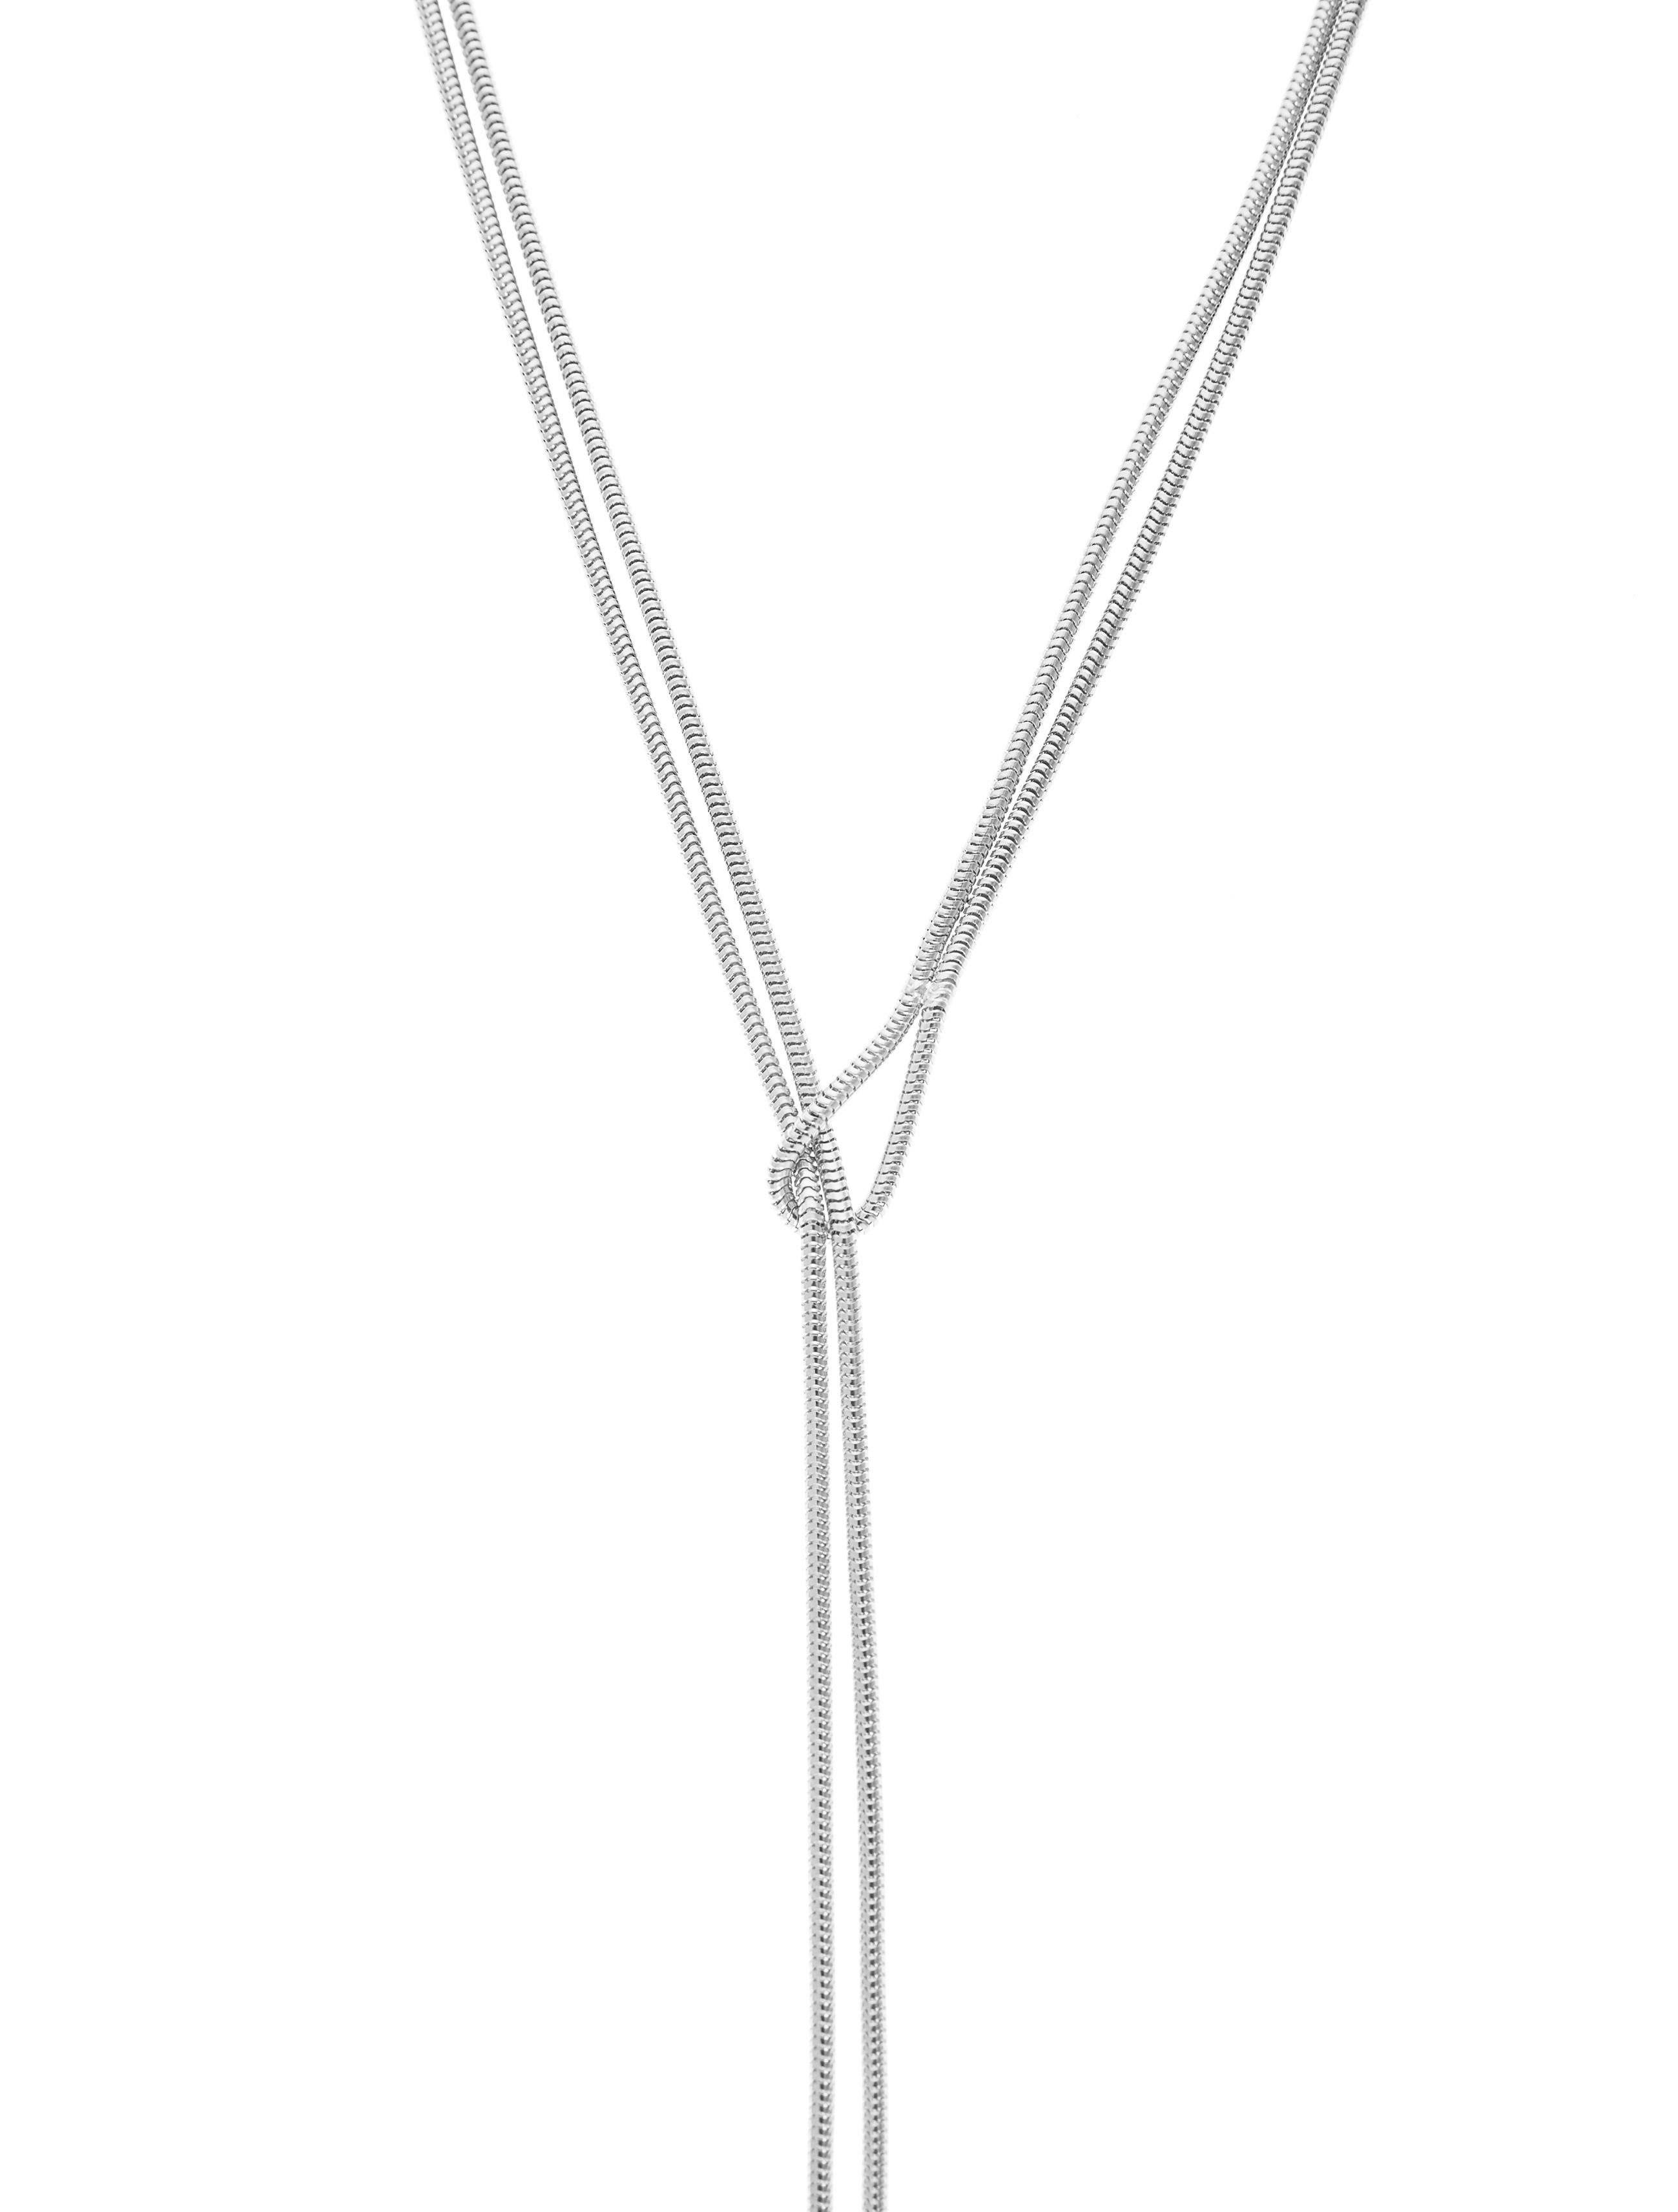 Contemporary Necklace Lariat Chain Long Smart Minimal 925 Sterling Silver Scurf Greek Jewelry For Sale